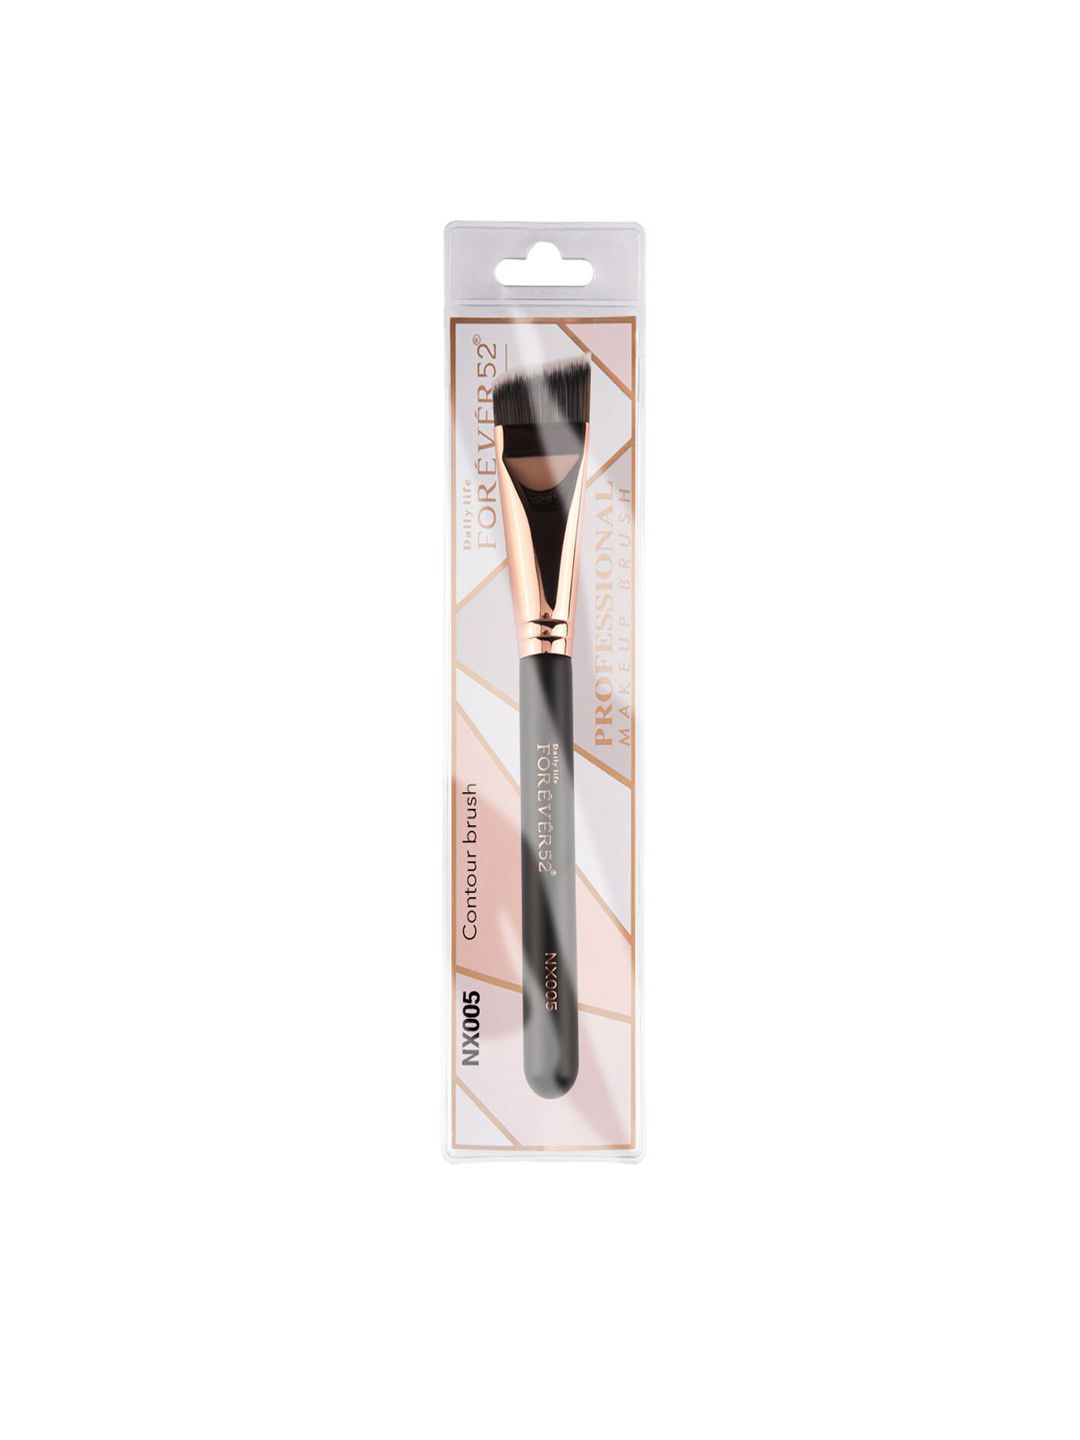 Daily Life Forever52 Contour Brush NX005 Price in India